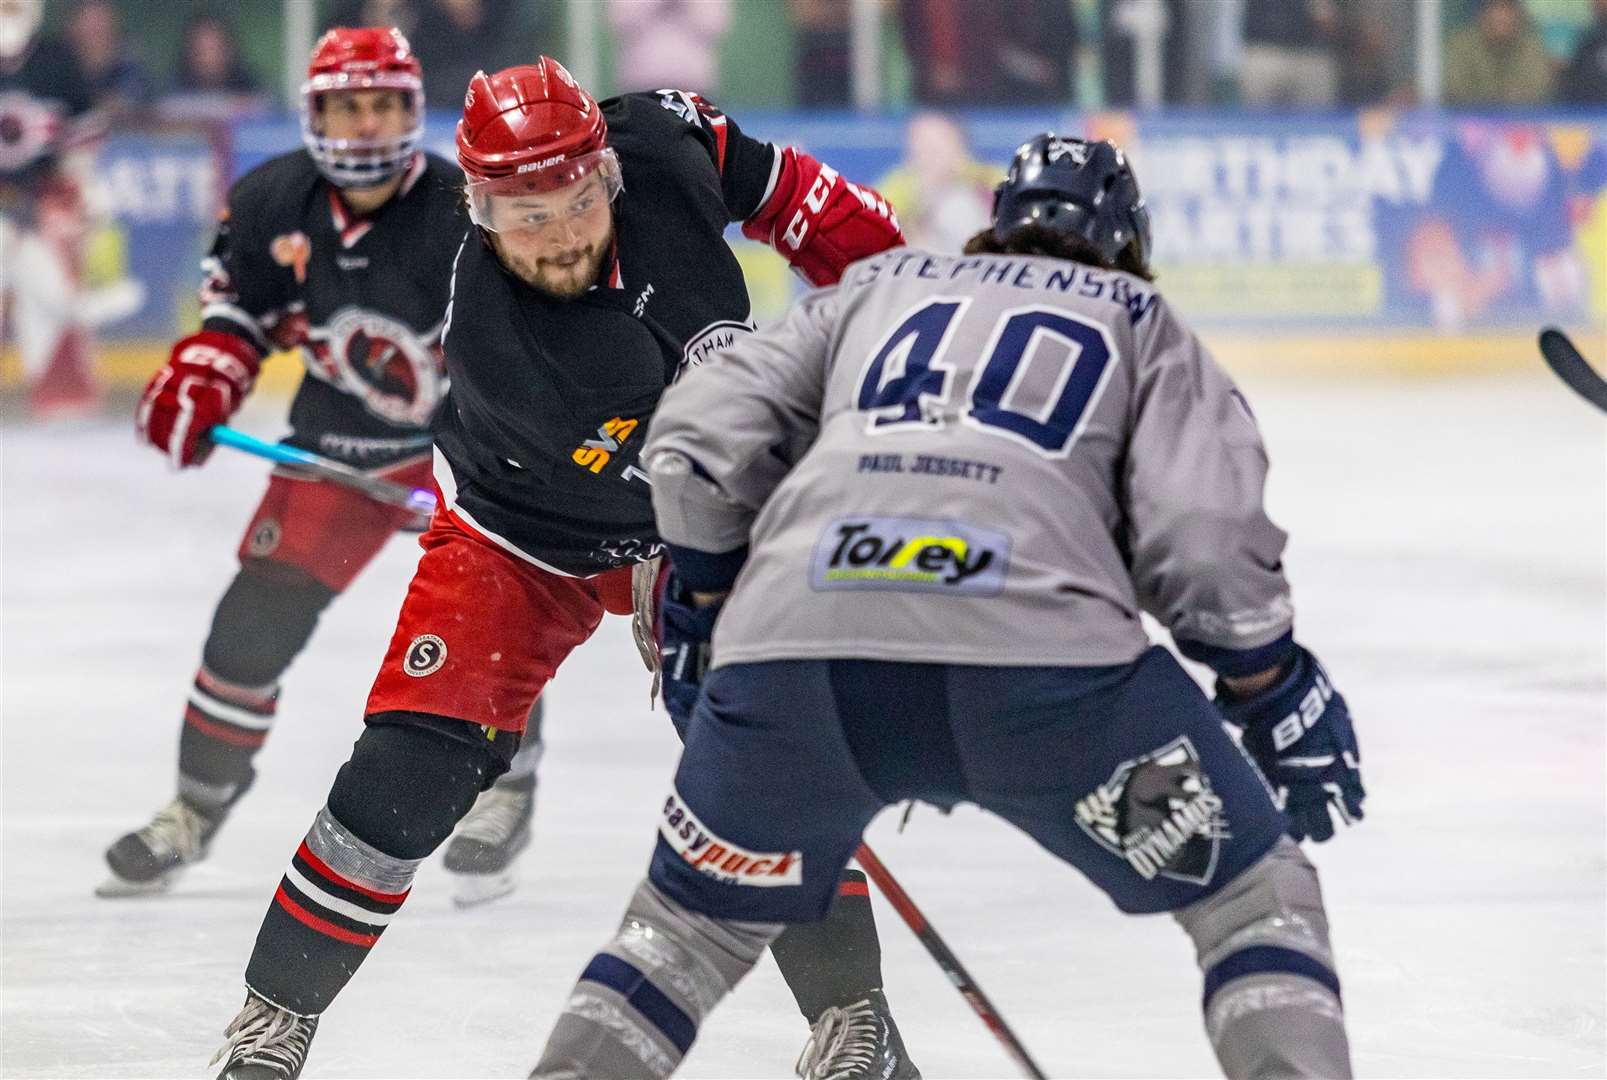 Invicta Dynamos ready for a league and cup double against Streatham Picture: David Trevallion